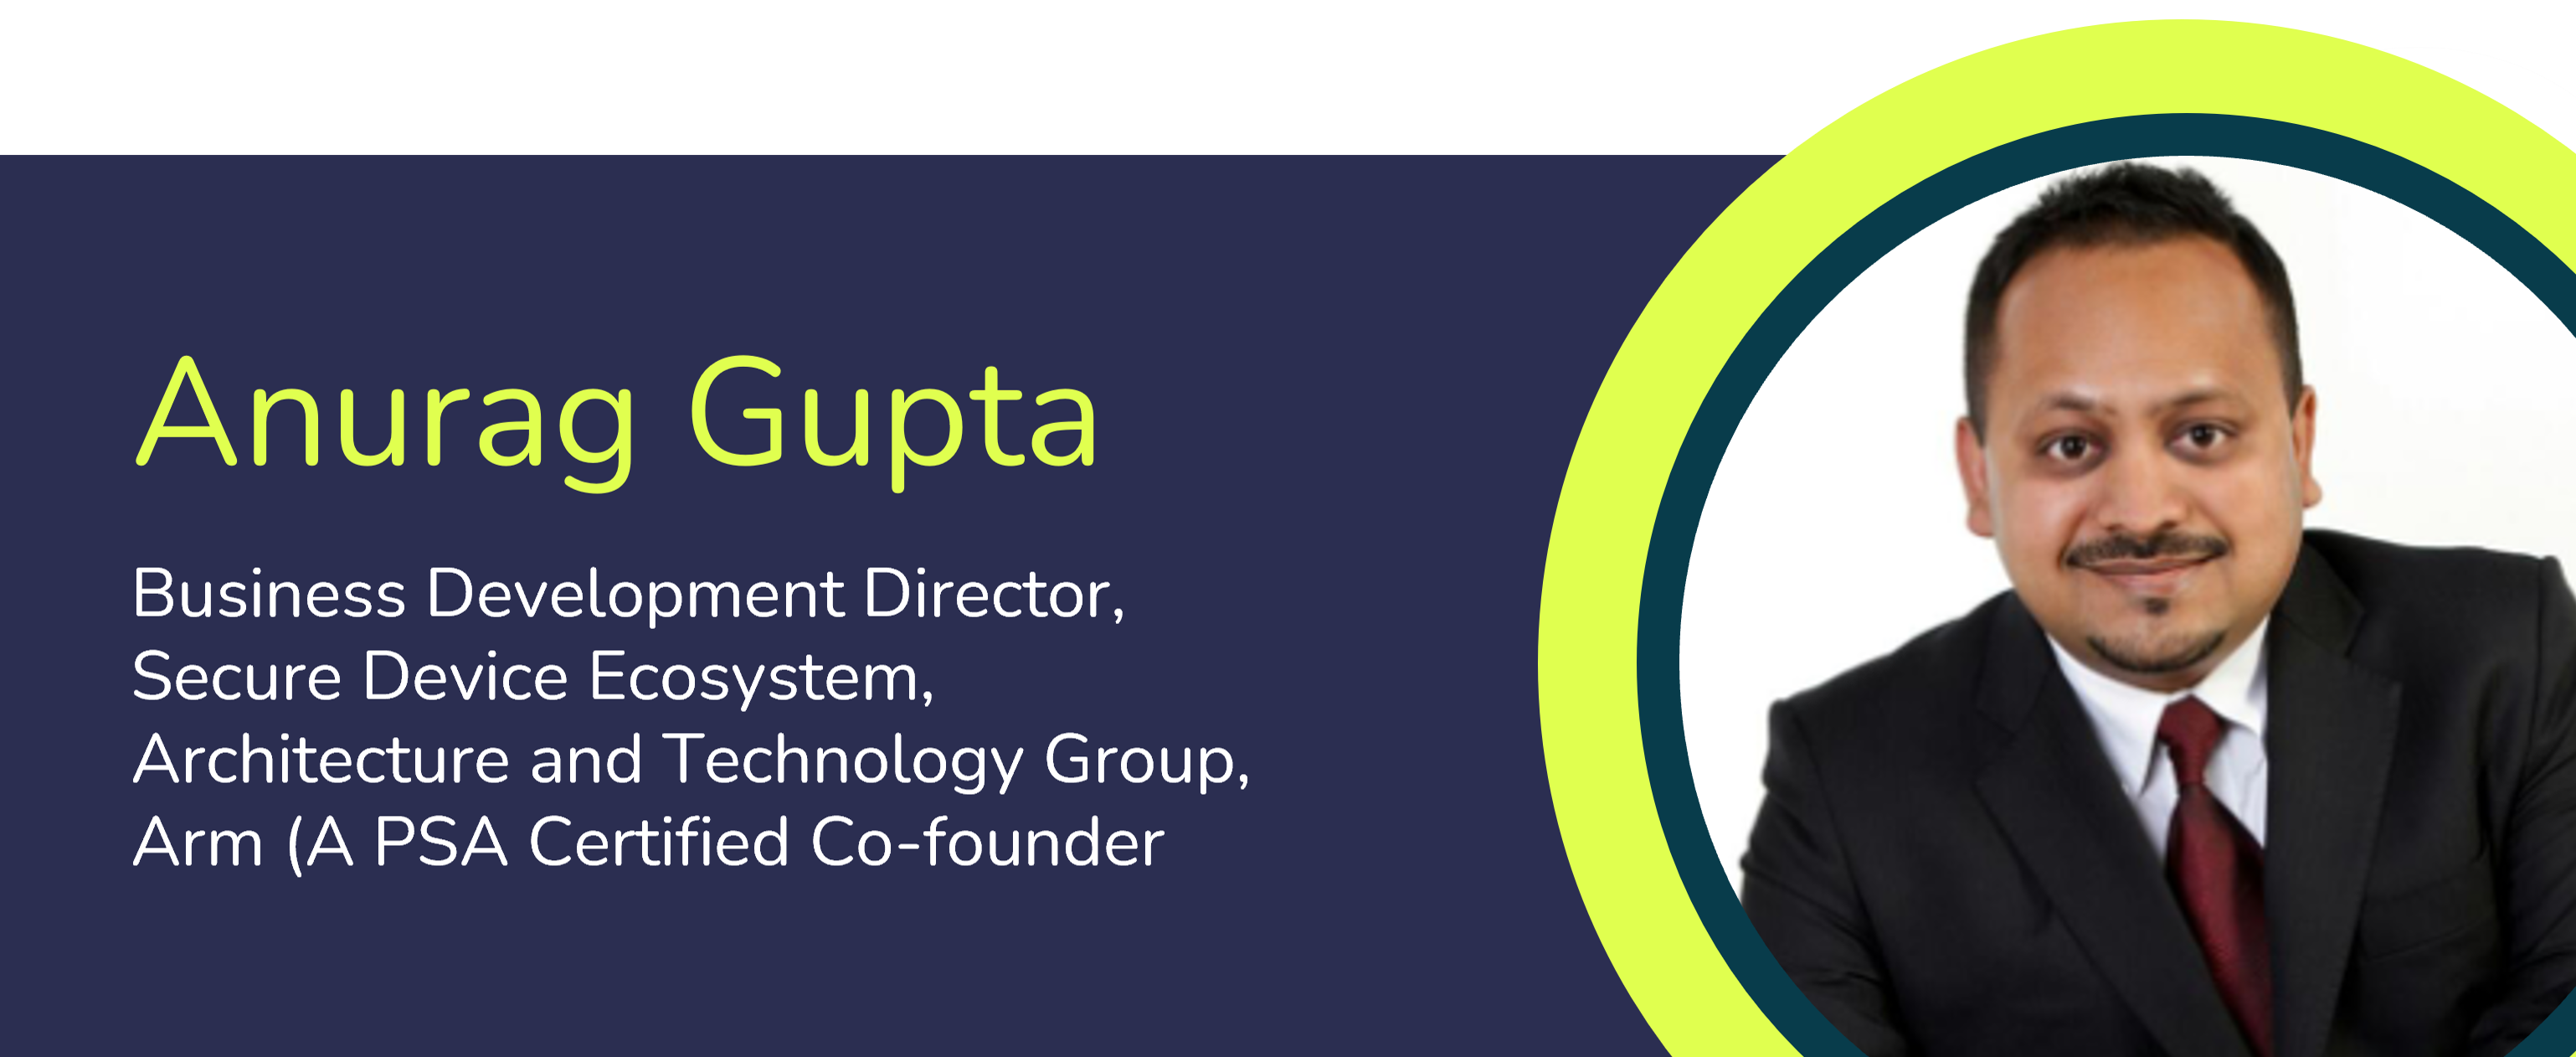 This webinar is hosted by Anurag Gupta, Business Development Director for the Secure Device Ecosystem at Arm (A PSA Certified co-founder)